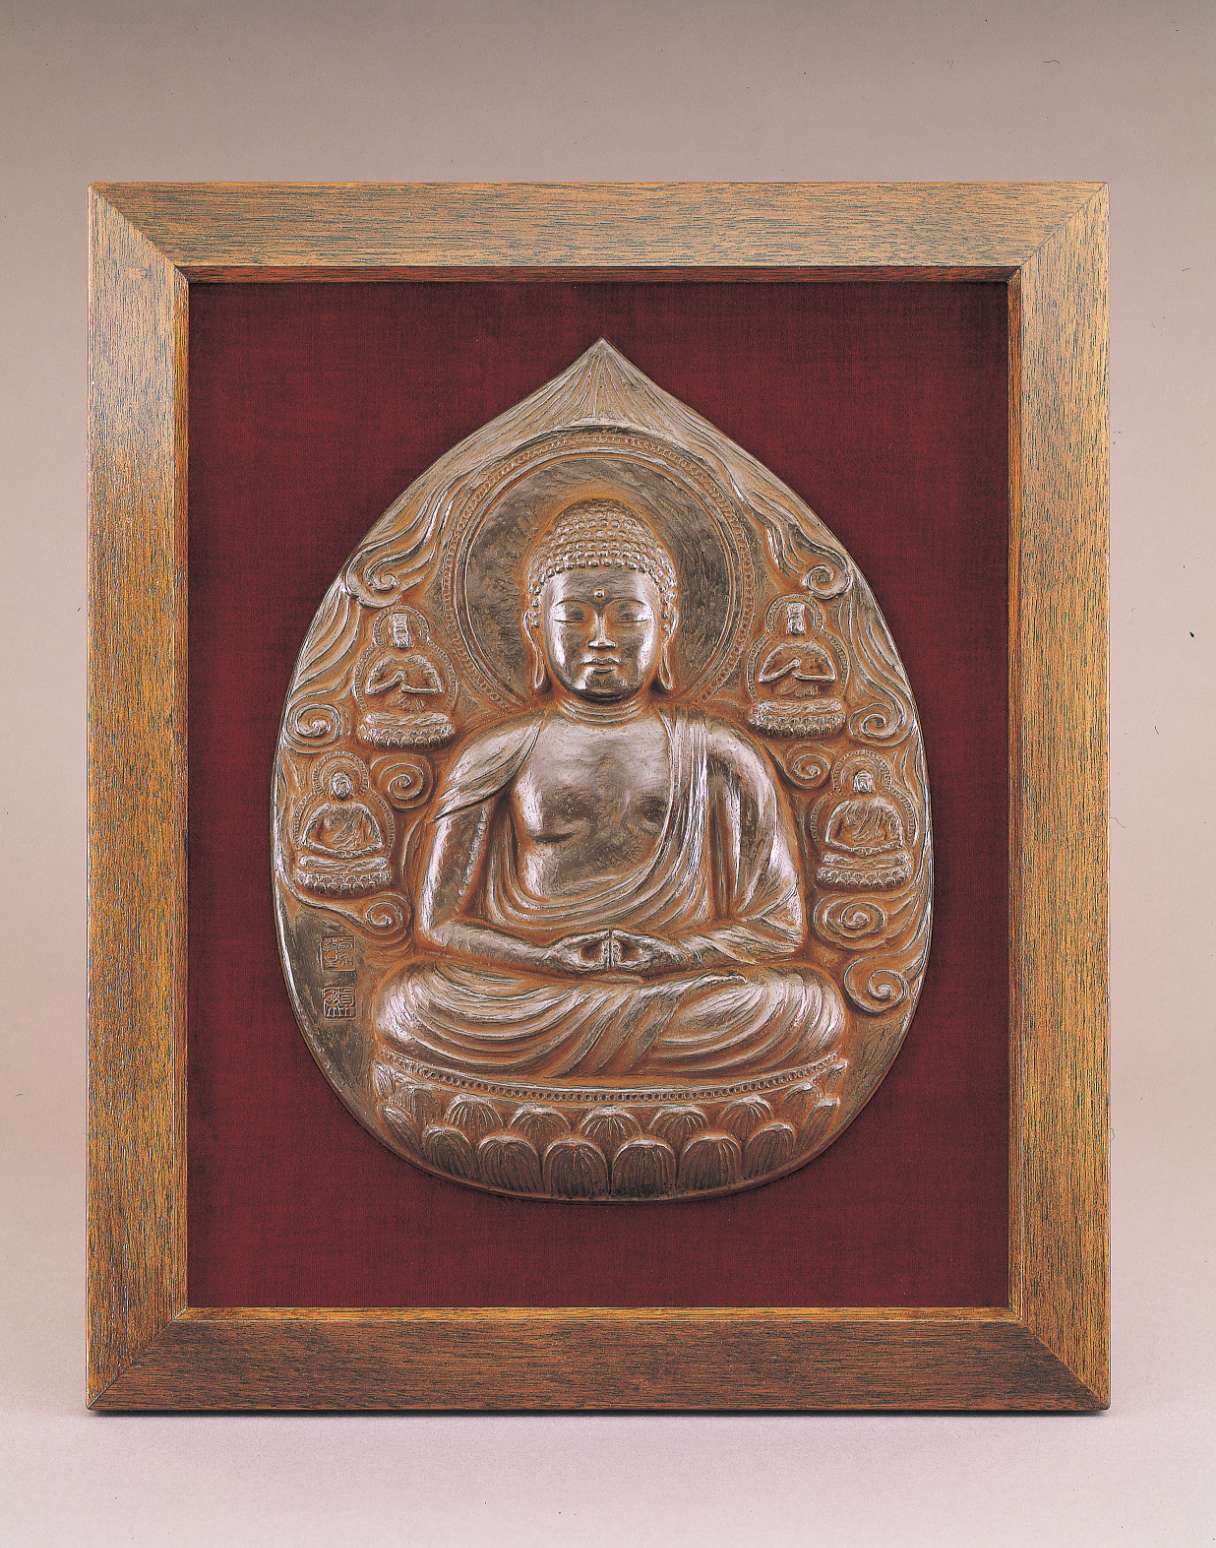 A tear-shaped metallic relief of a buddha sitting cross-legged atop a lotus seat with his hands in meditation posture, surrounded by clouds and four smaller buddhas.